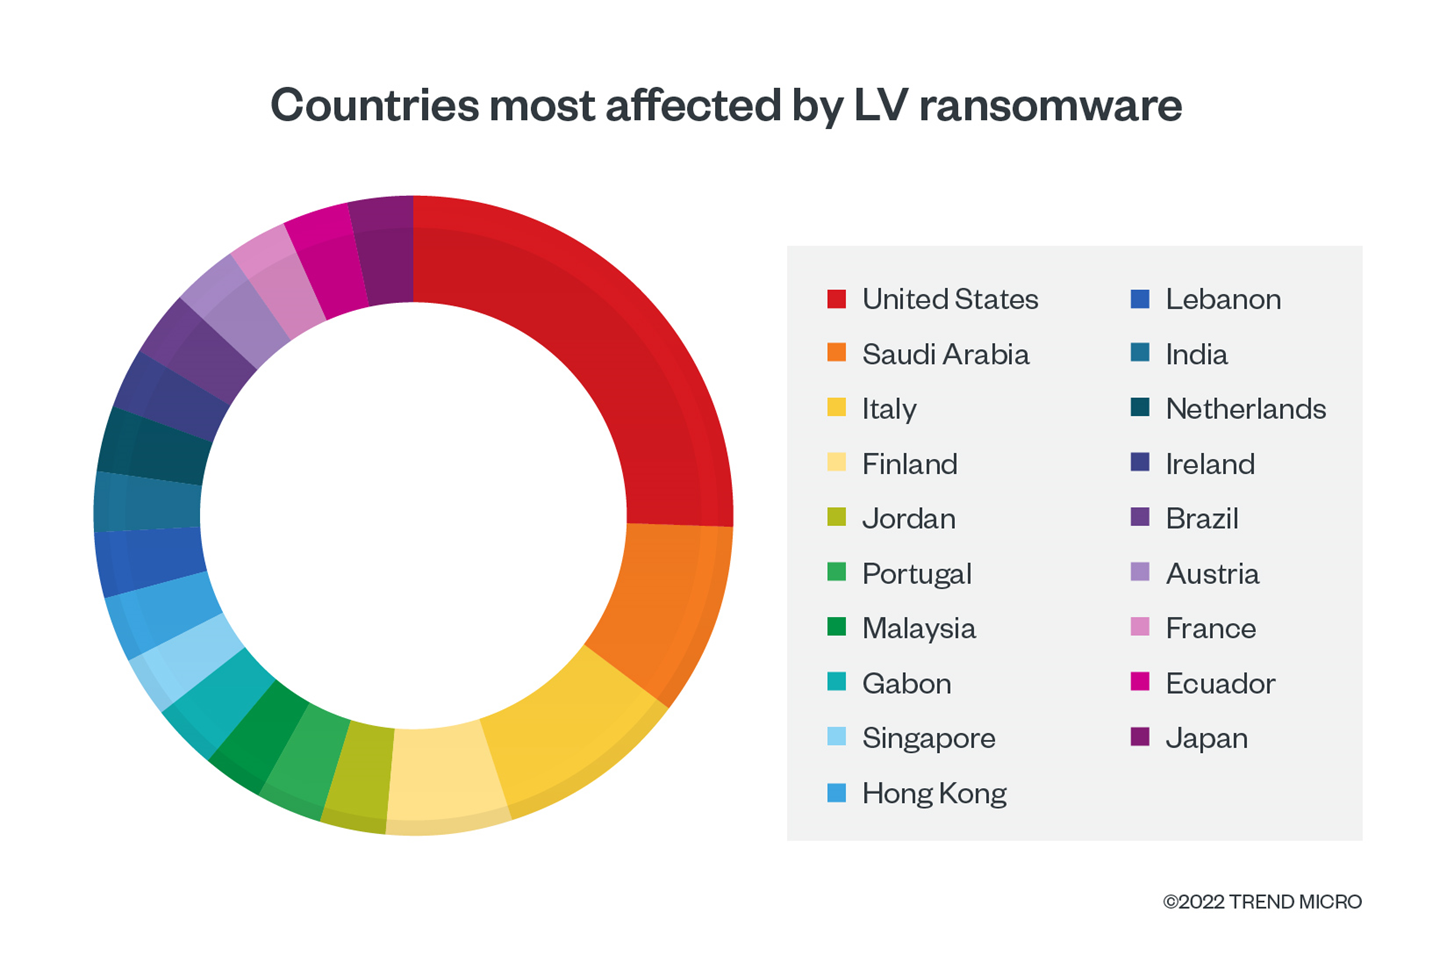 Figure 5. The countries most affected by LV ransomware in 2022